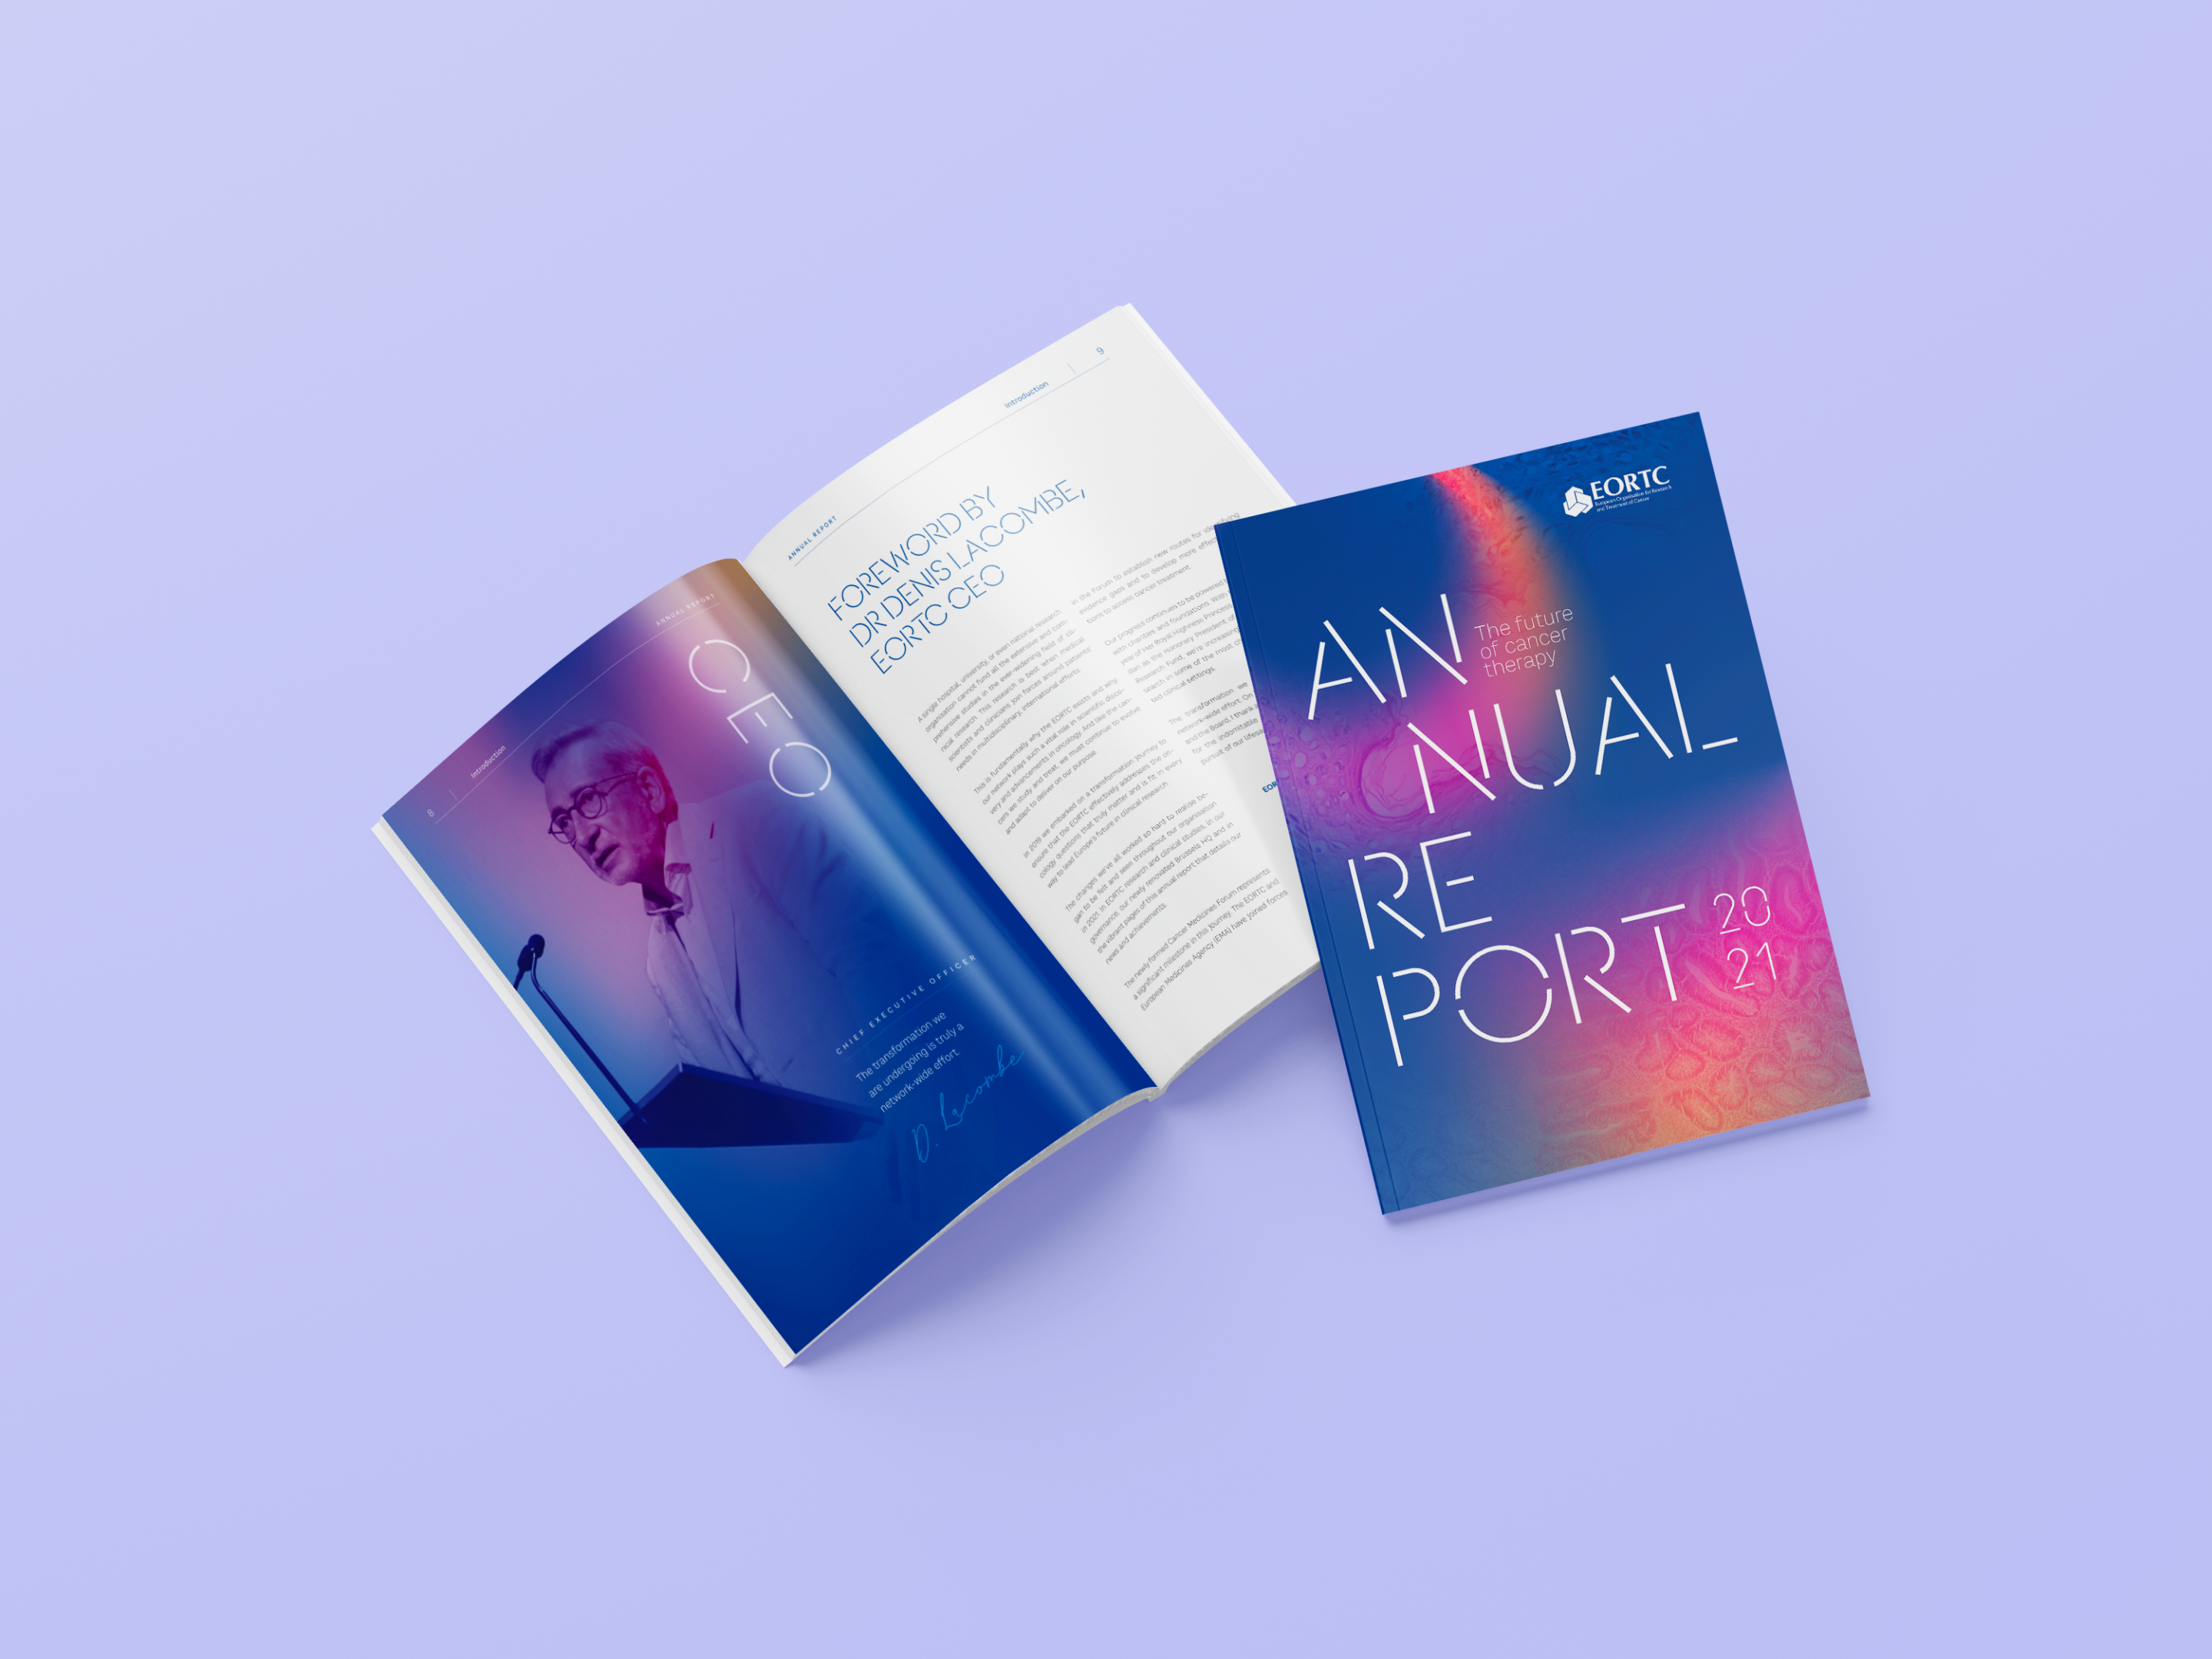 Some examples of pages from the EORTC Annual Report by our creative communications agency Atelier Design